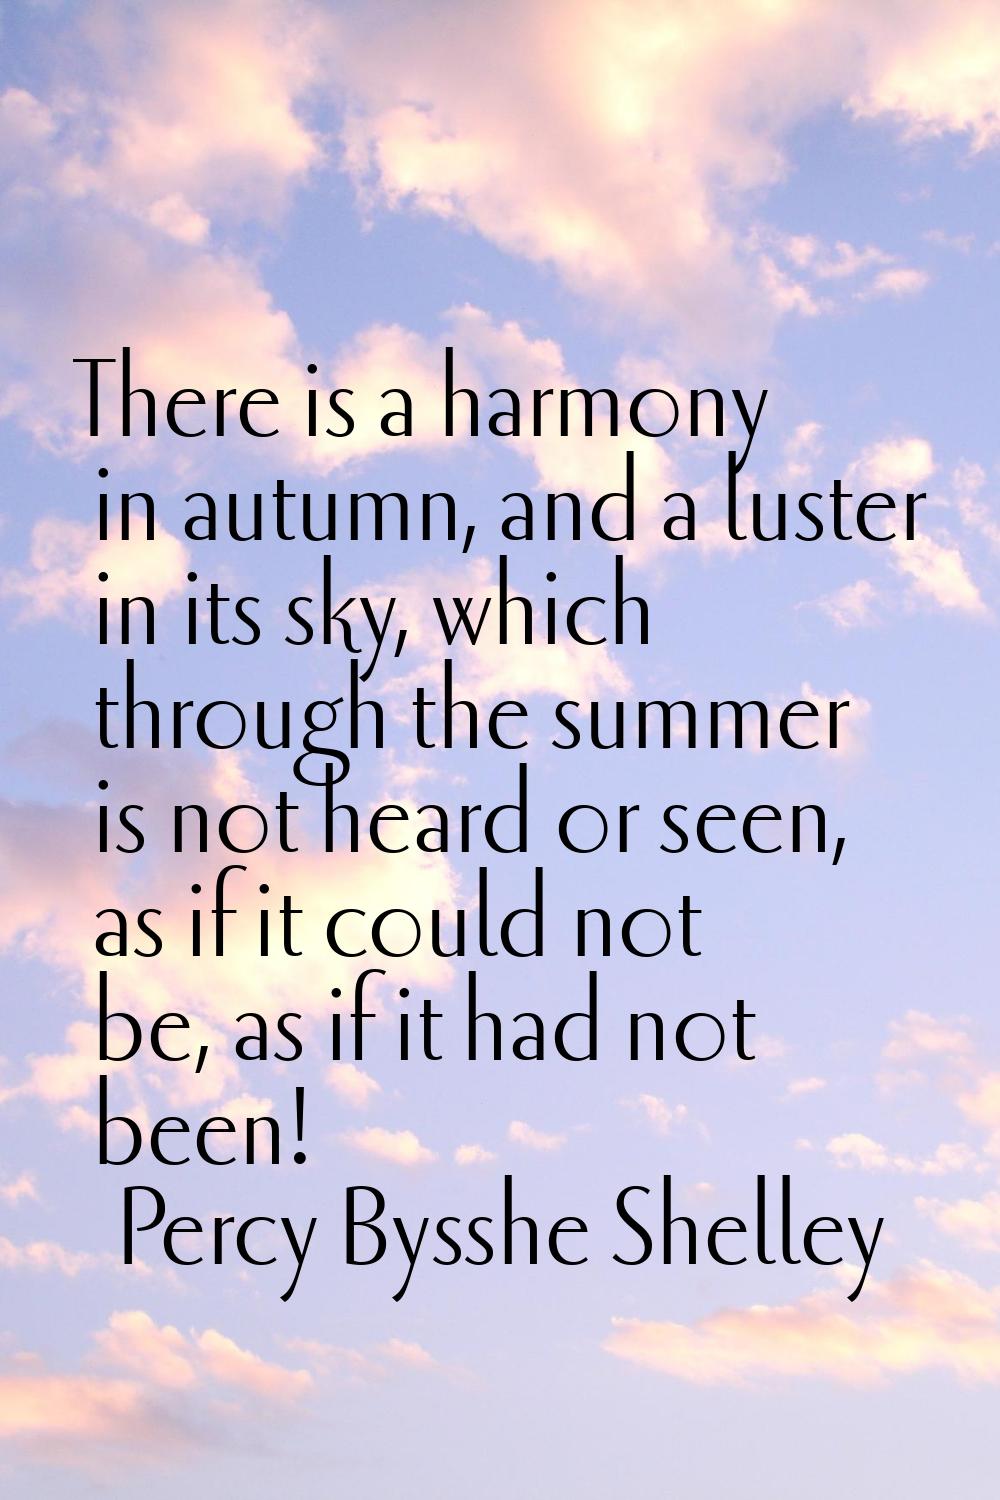 There is a harmony in autumn, and a luster in its sky, which through the summer is not heard or see